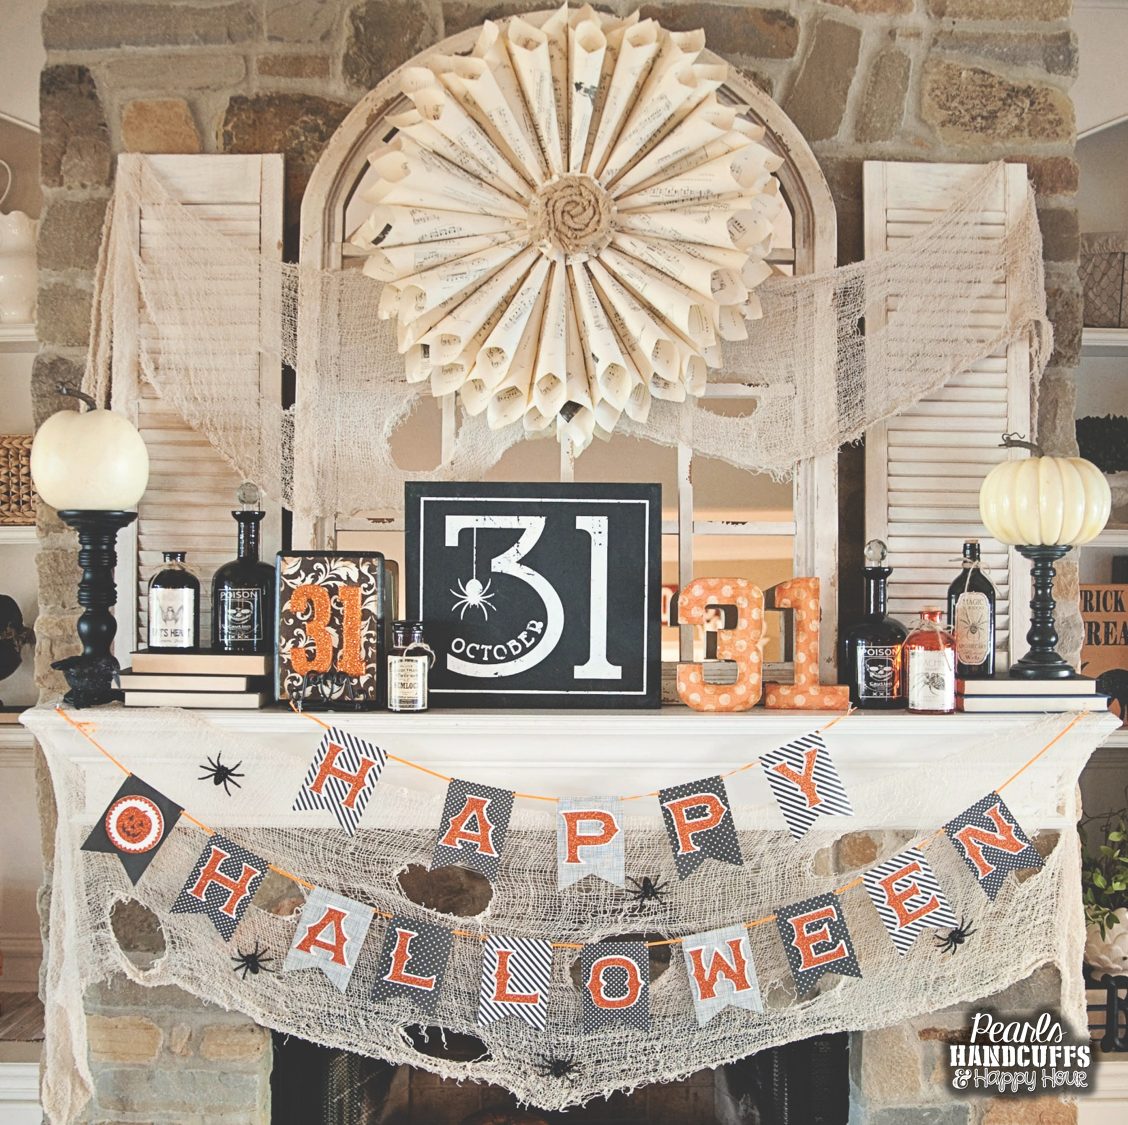 Pearls, Handcuffs, and Happy Hour: Home Tour Tuesday - The Halloween ...